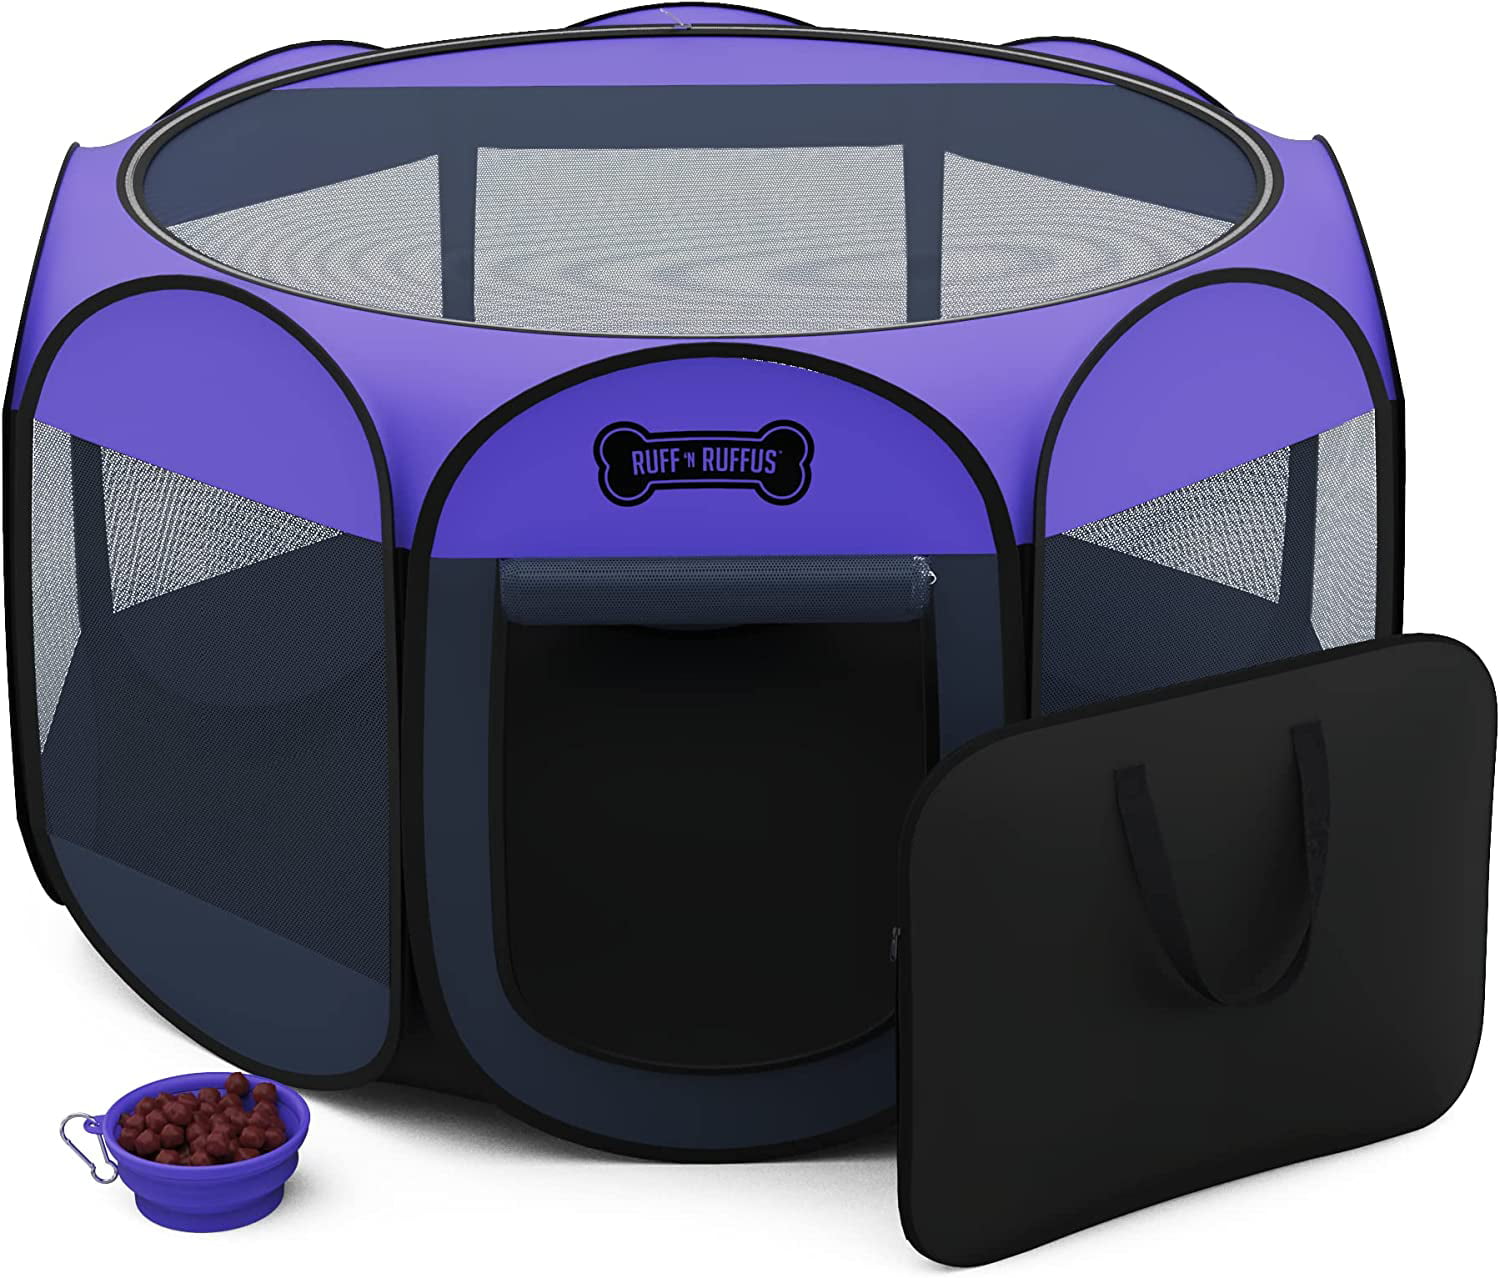 Ruff 'n Ruffus Portable Foldable Pet Playpen + Free Carry Case and Bowl | Indoor/Outdoor Water-Resistant Shade Cover